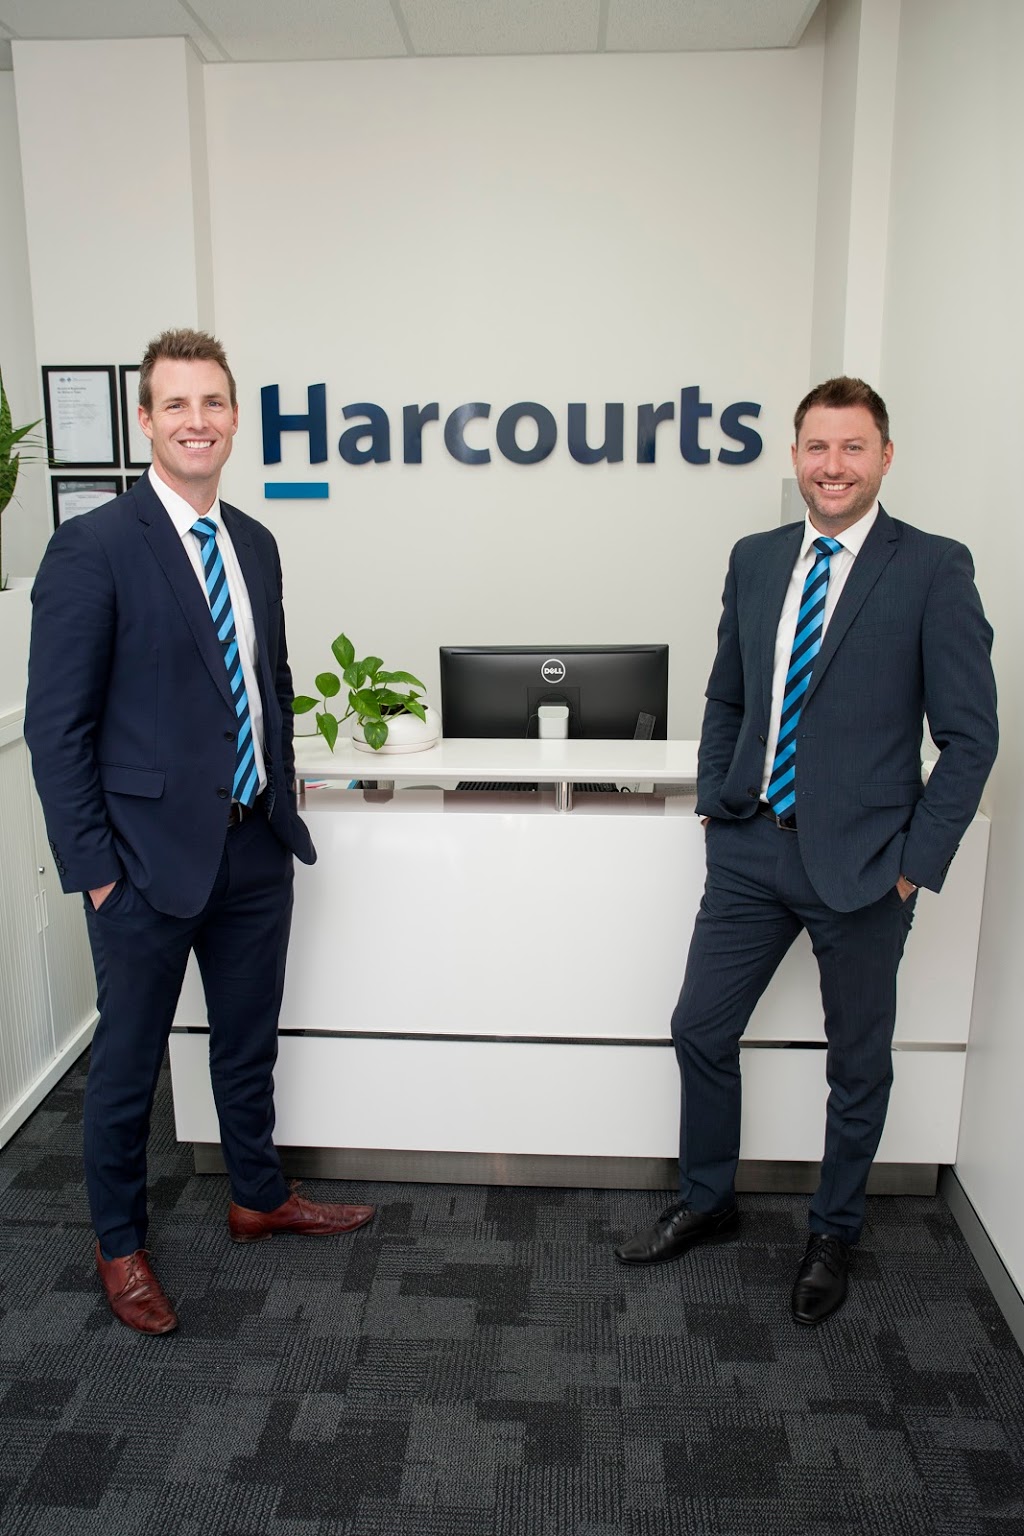 Harcourts City Central | real estate agency | 231 Bulwer St, Perth WA 6000, Australia | 1300149116 OR +61 1300 149 116